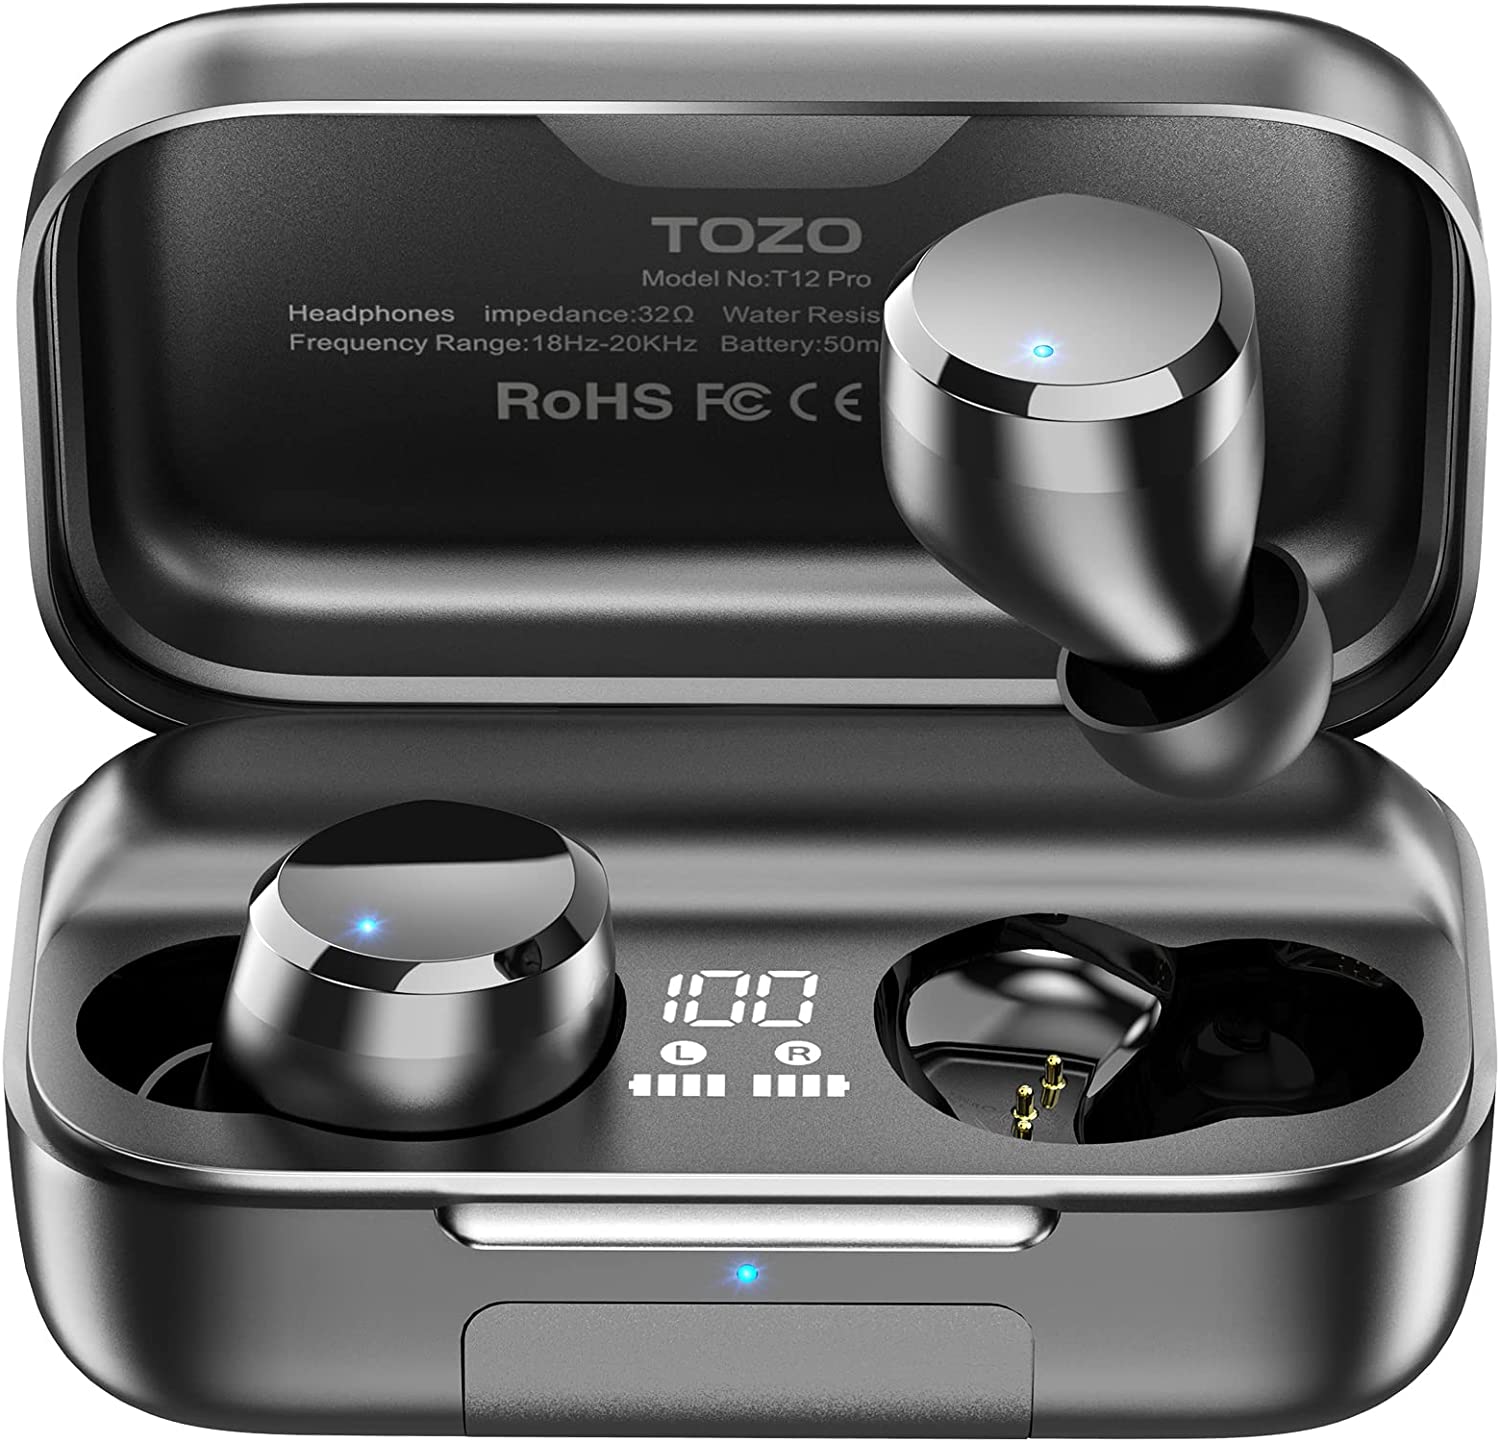 TOZO T12 Pro Noise Cancellation Bluetooth Earbuds Waterproof with Wireless Charging Case - Black - Pro-Distributing